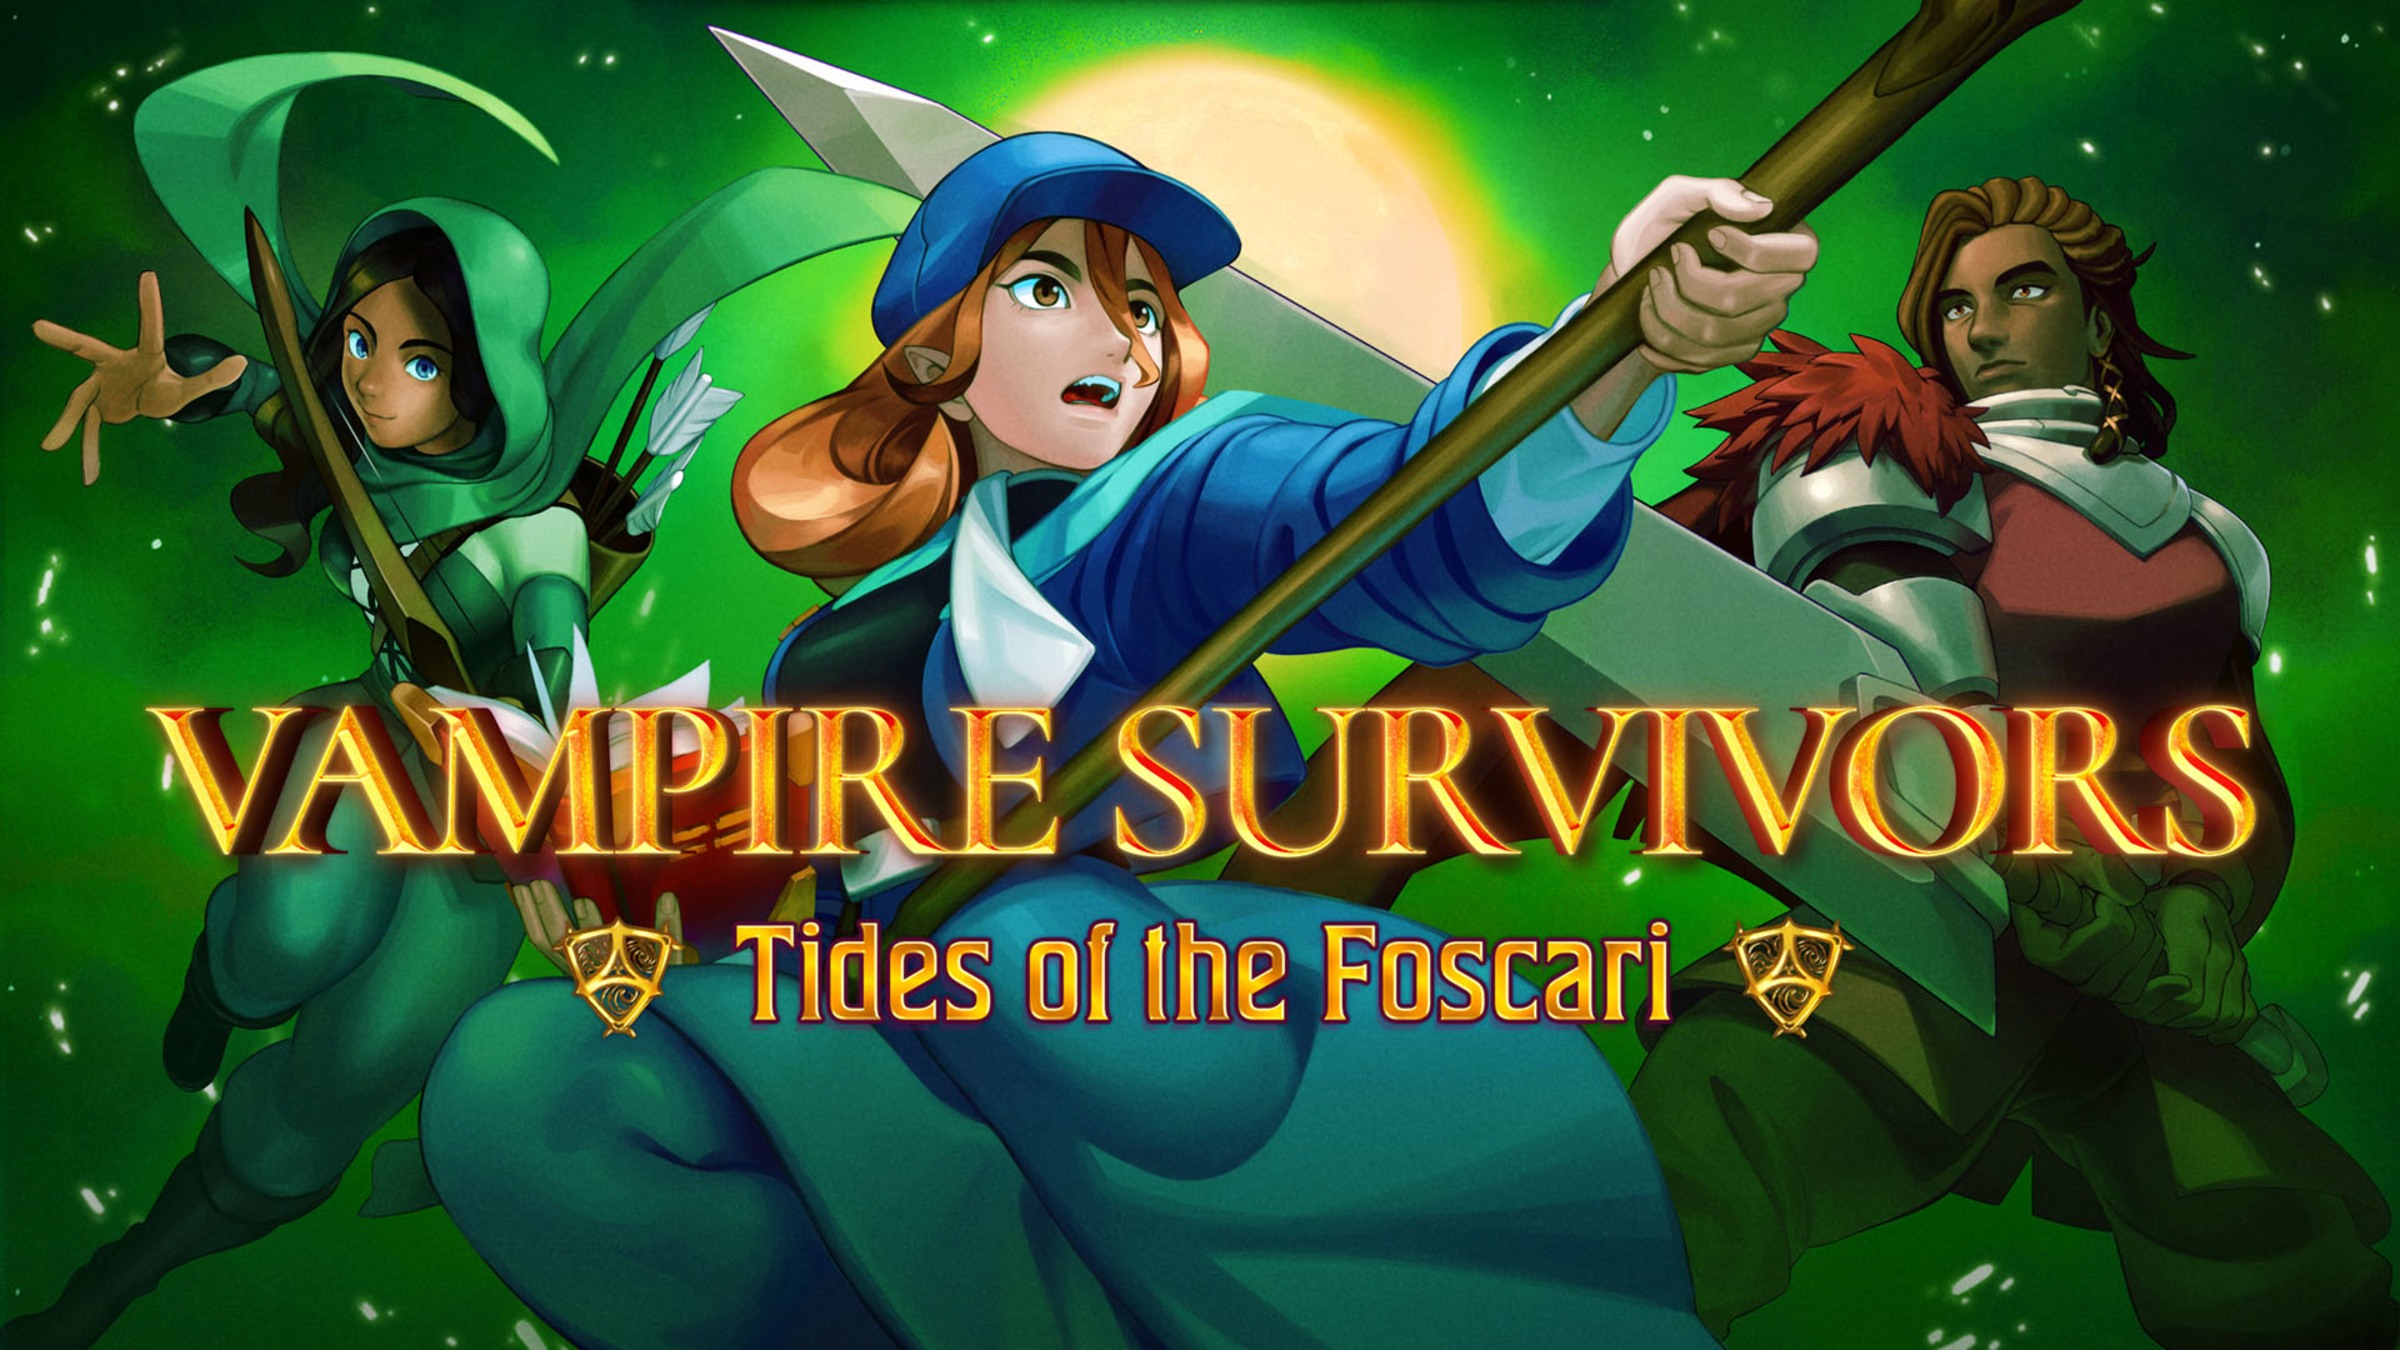 VAMPIRE SURVIVORS Is Coming To Switch, Will Ruin My Life